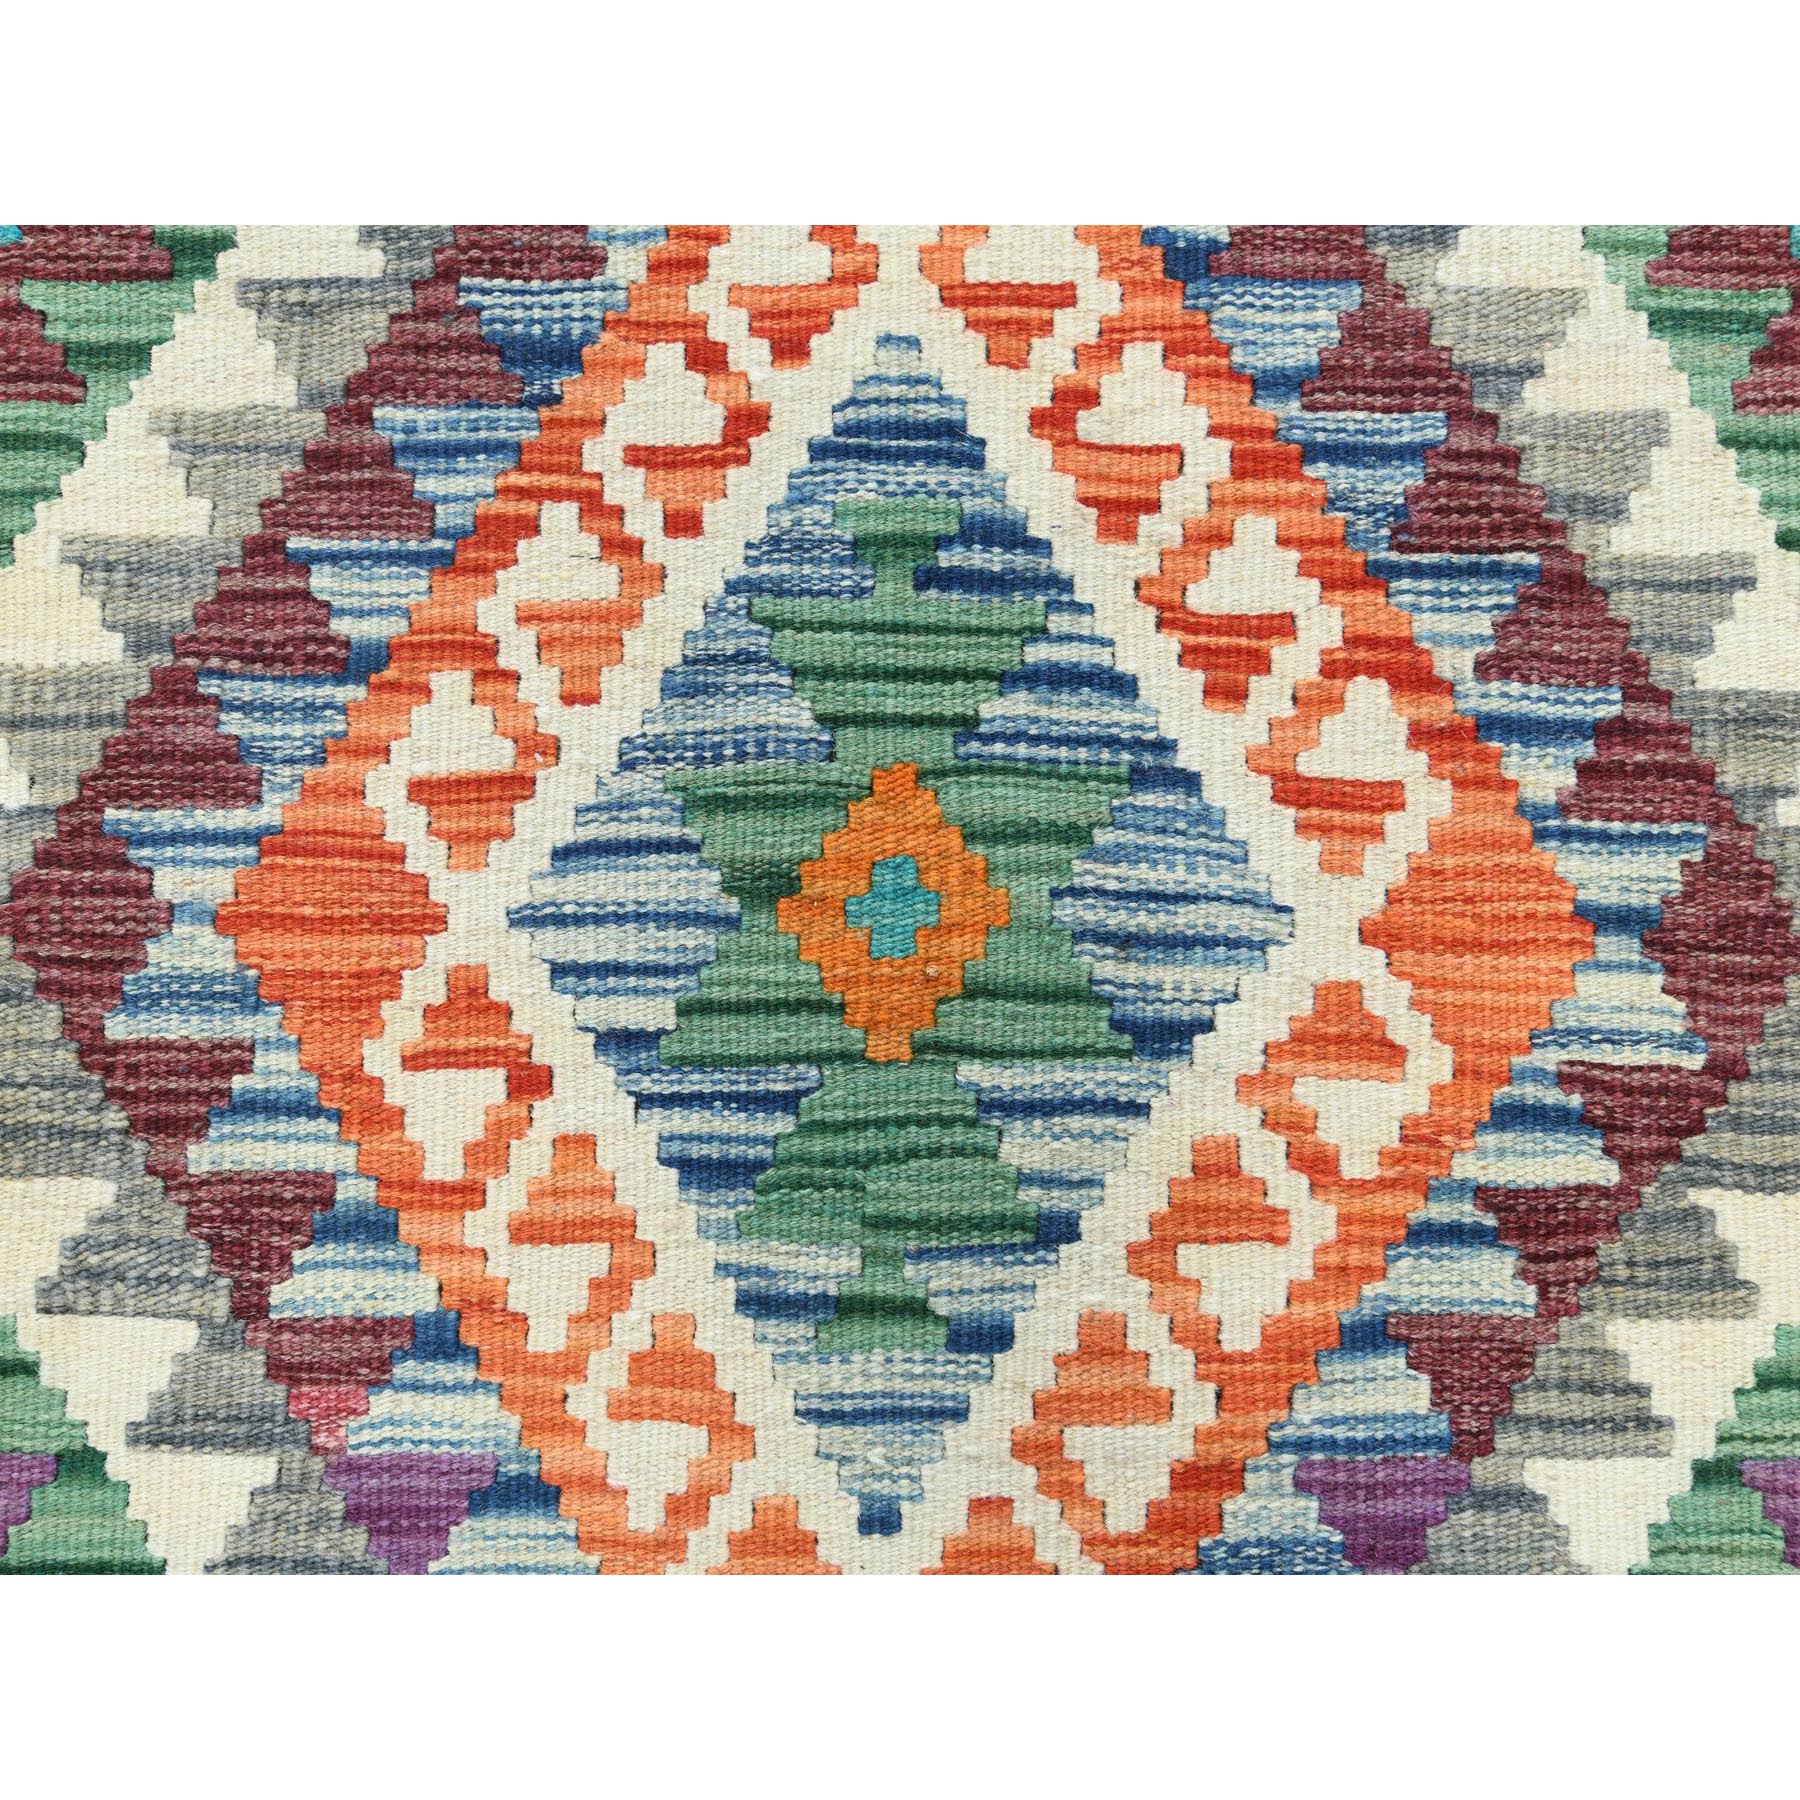 2'8"x16' Colorful, Afghan Kilim with Geometric Design, Hand Woven, Veggie Dyes, Flat Weave, Reversible, Pure Wool XL Runner Oriental Rug 